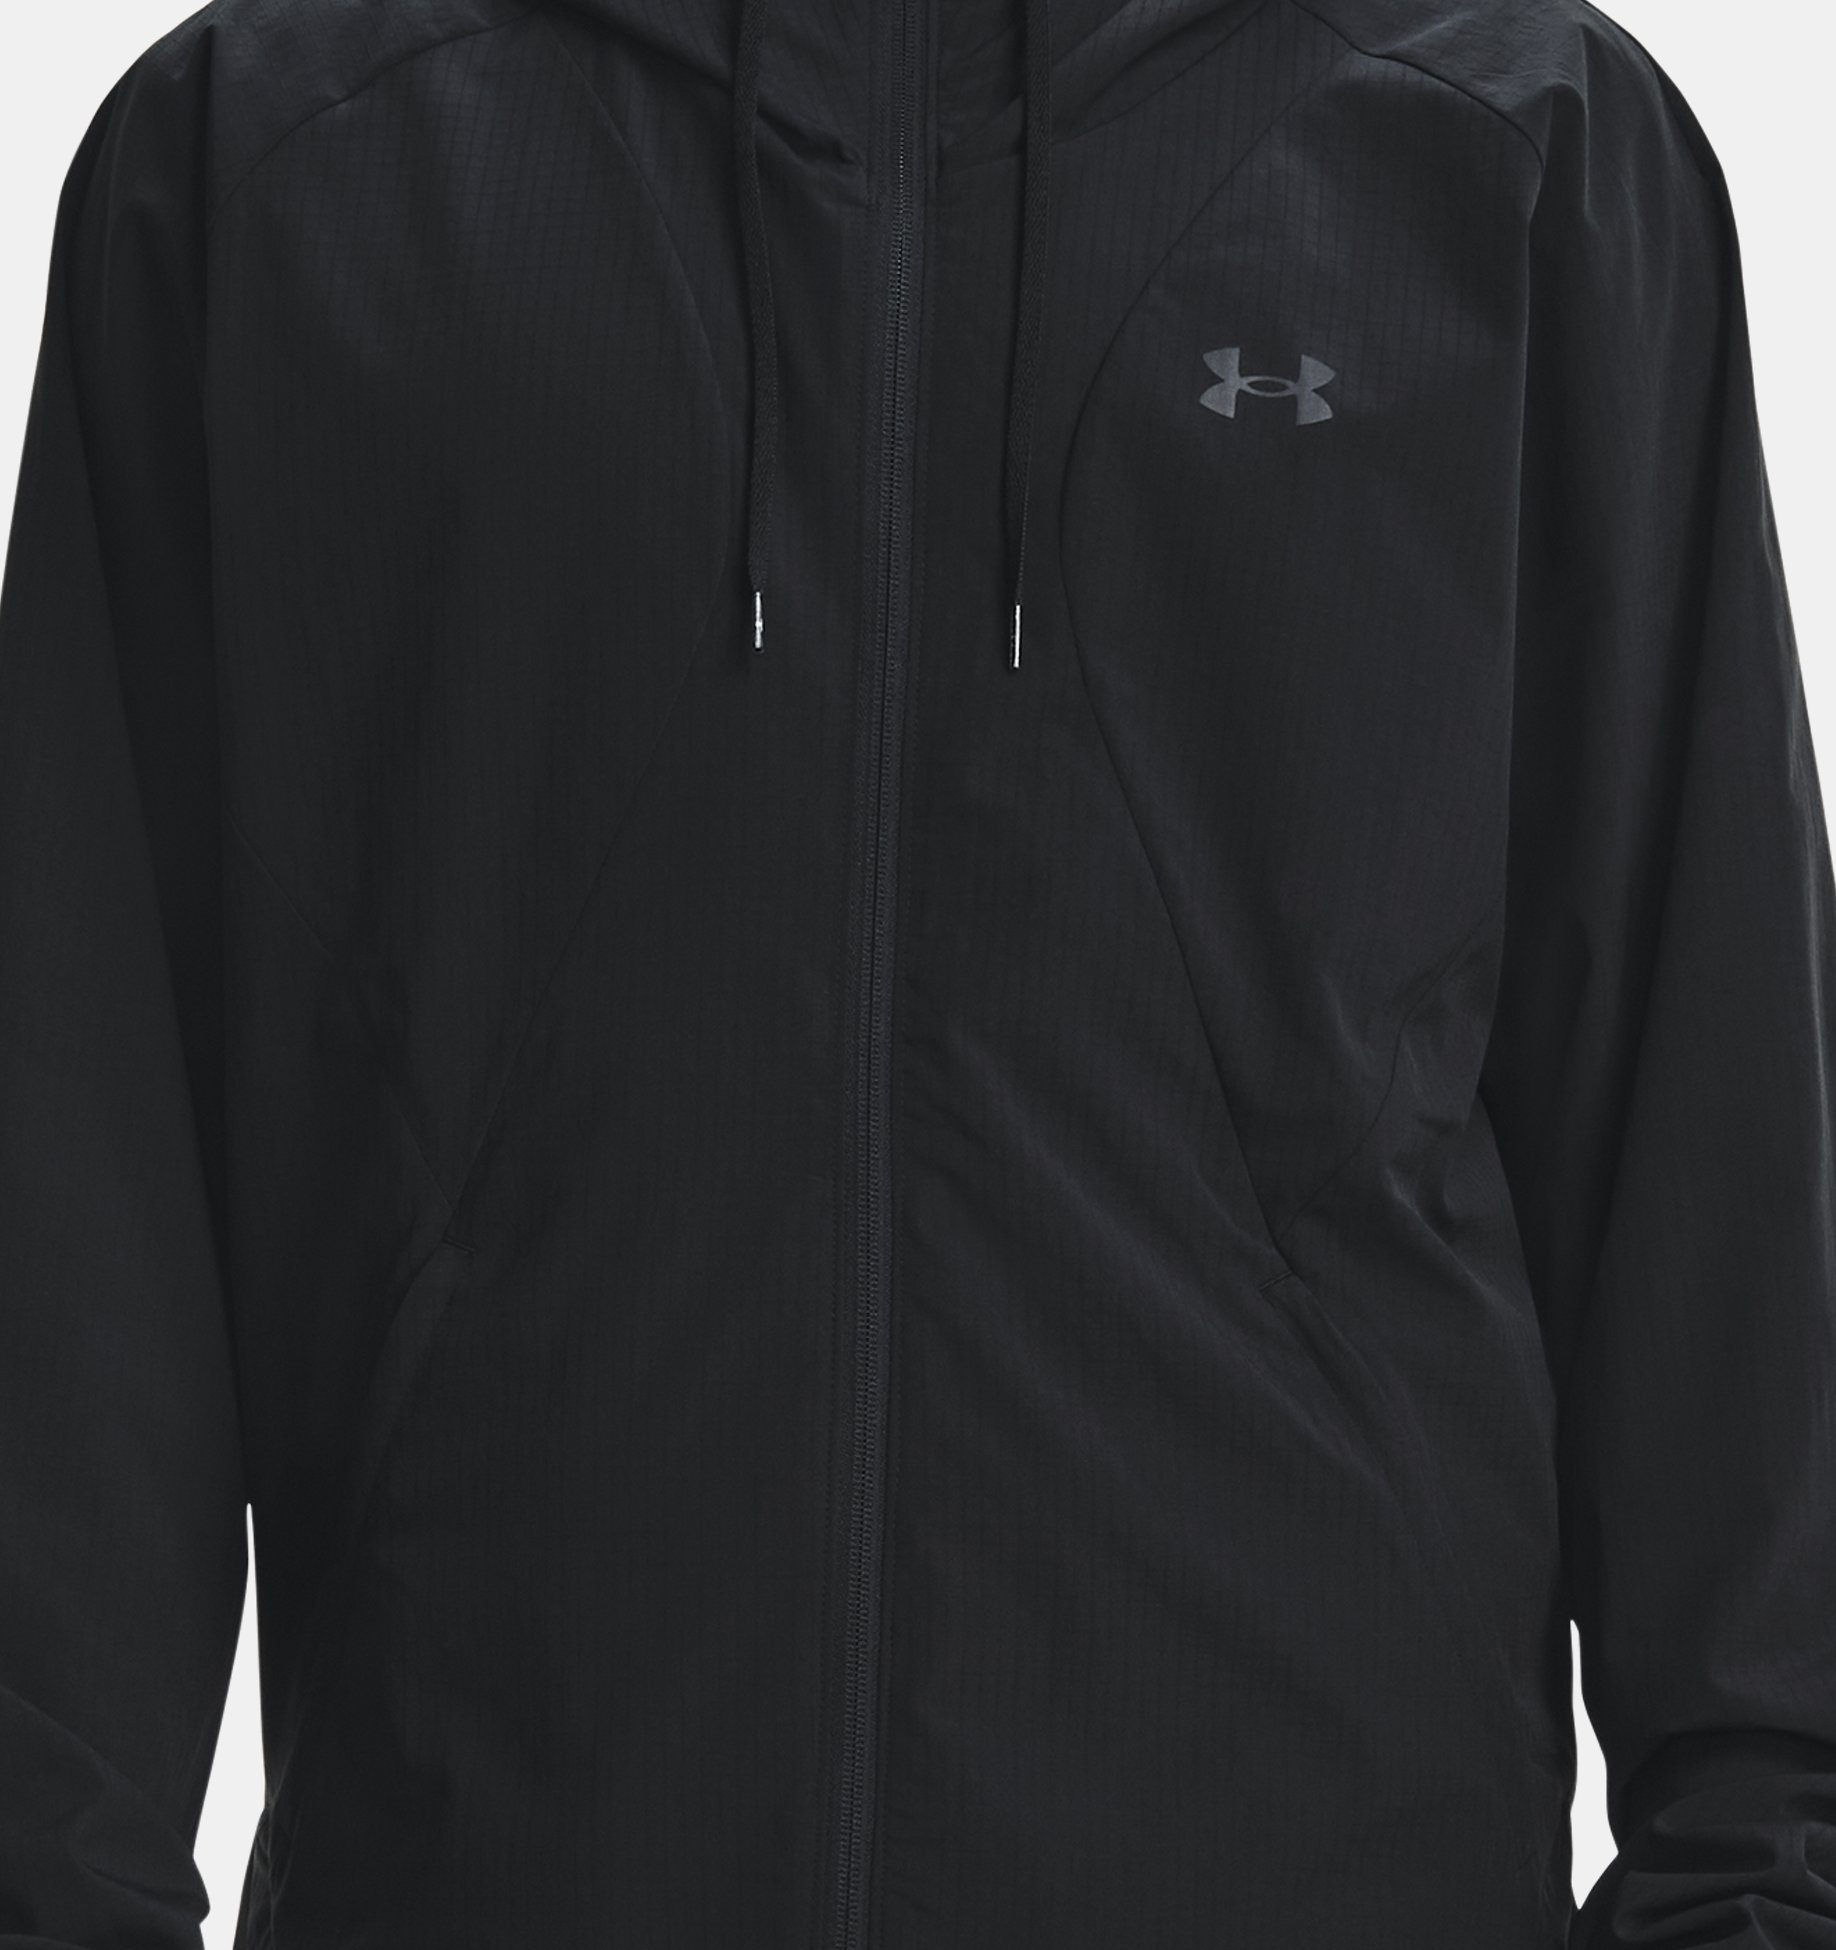 Under armour Woven Perforated Windbreaker Jacket Grey